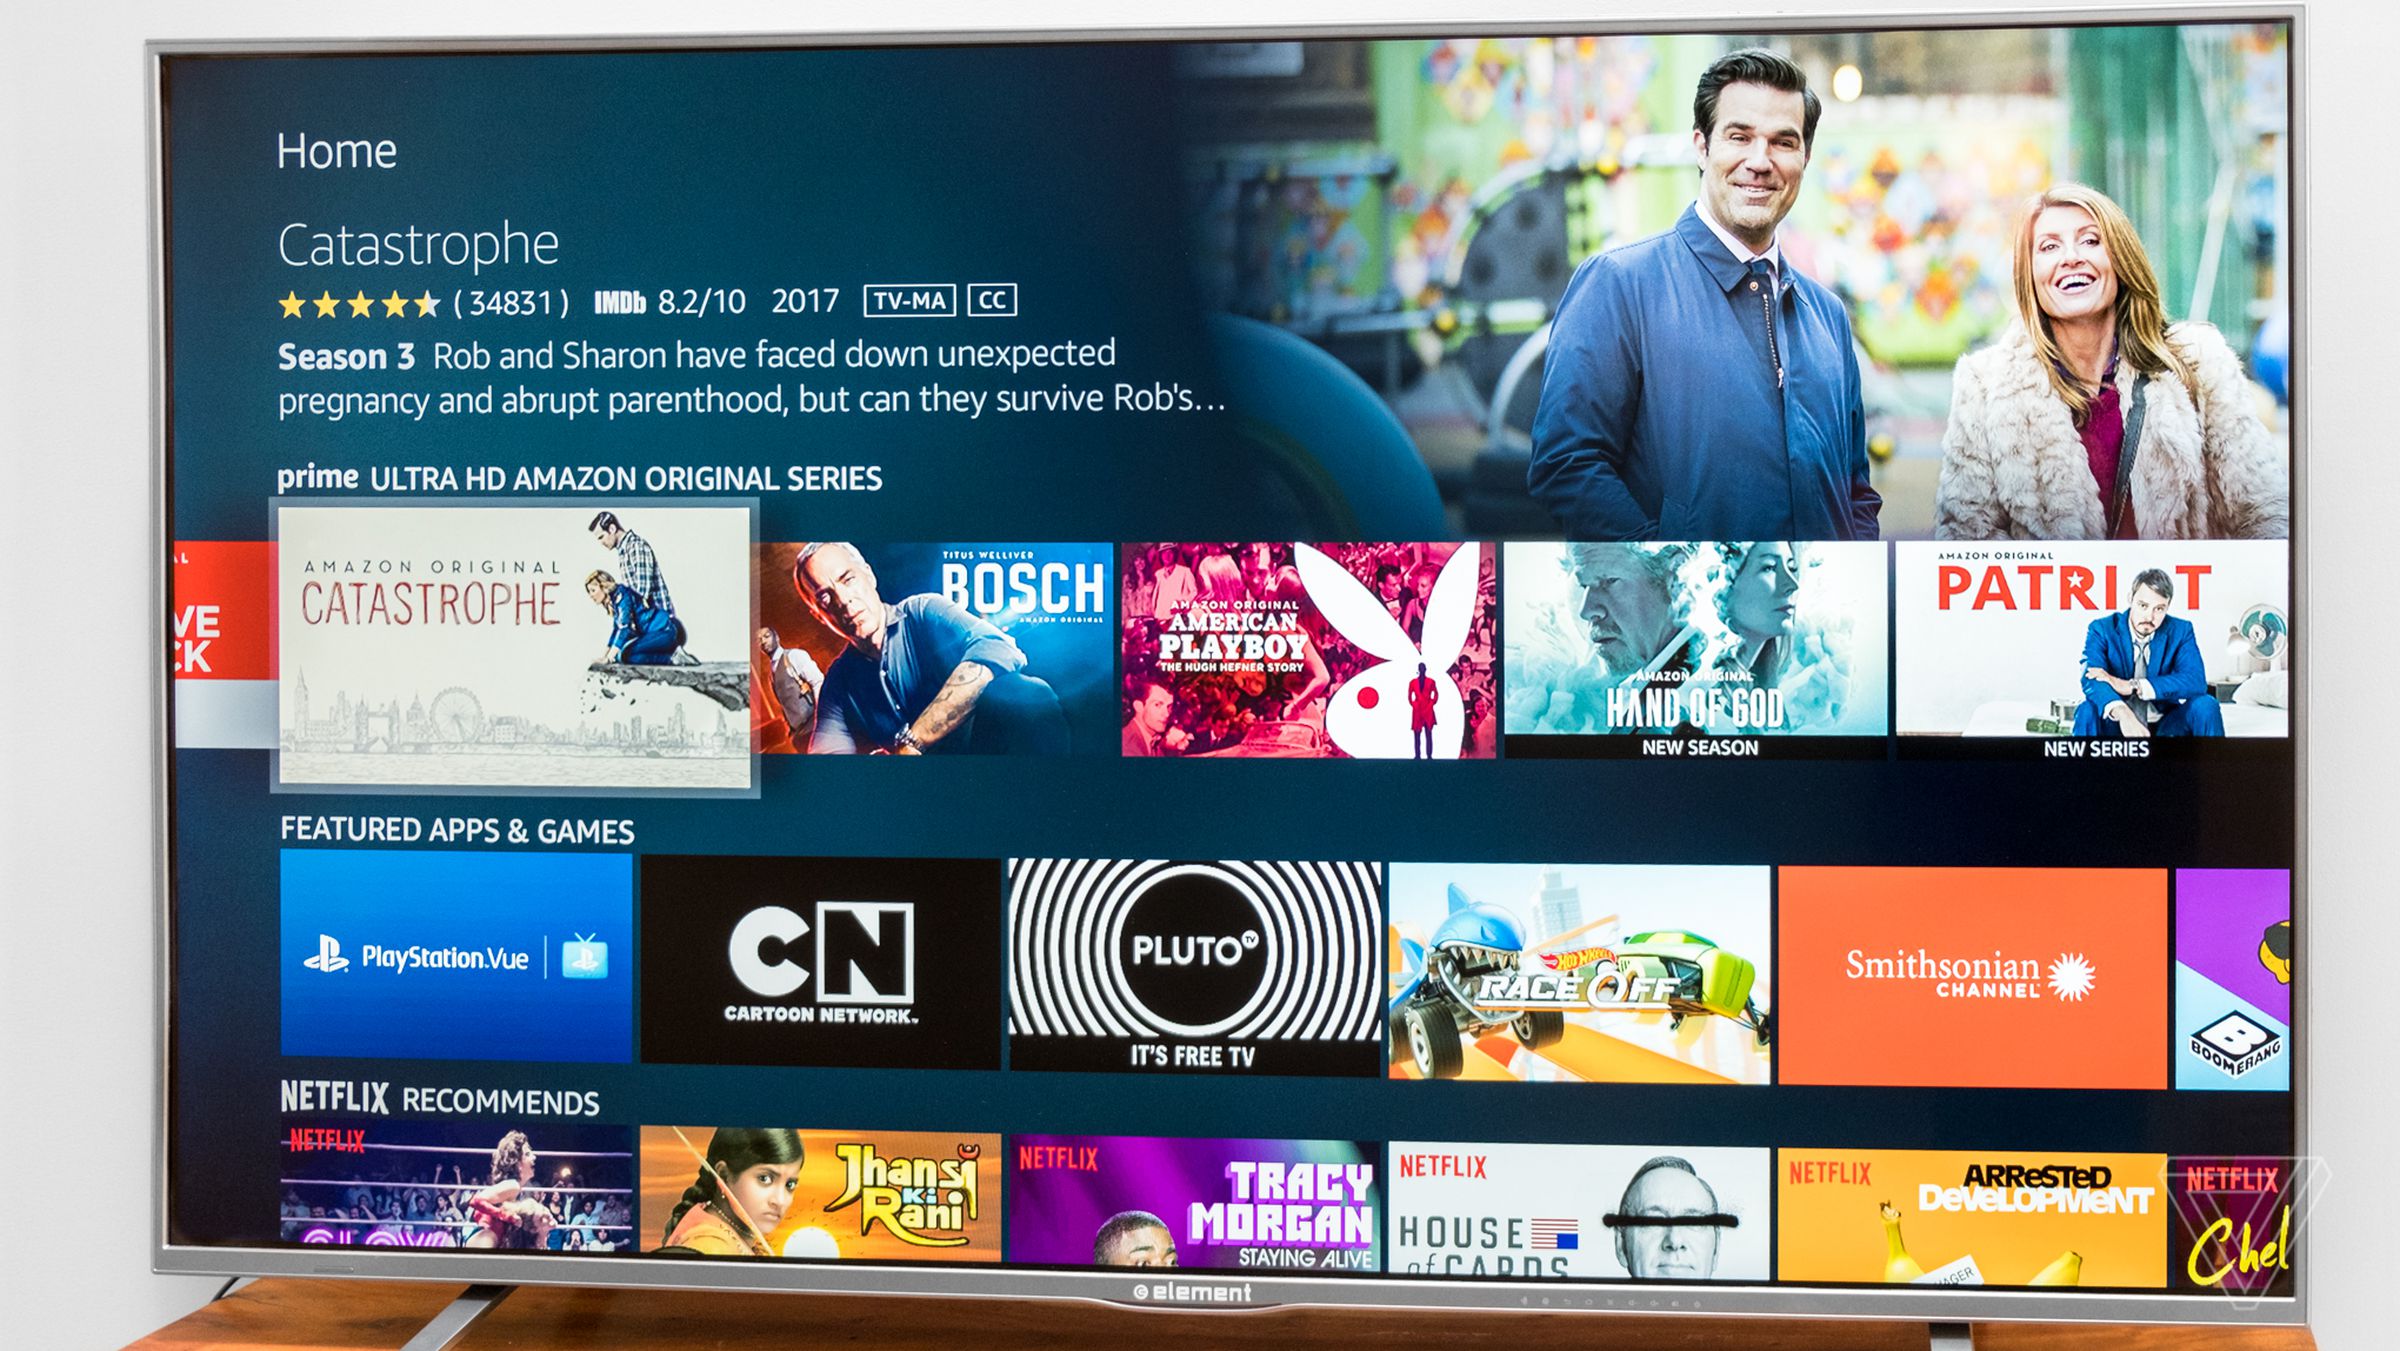 The original Fire TV Edition was announced at CES 2017.